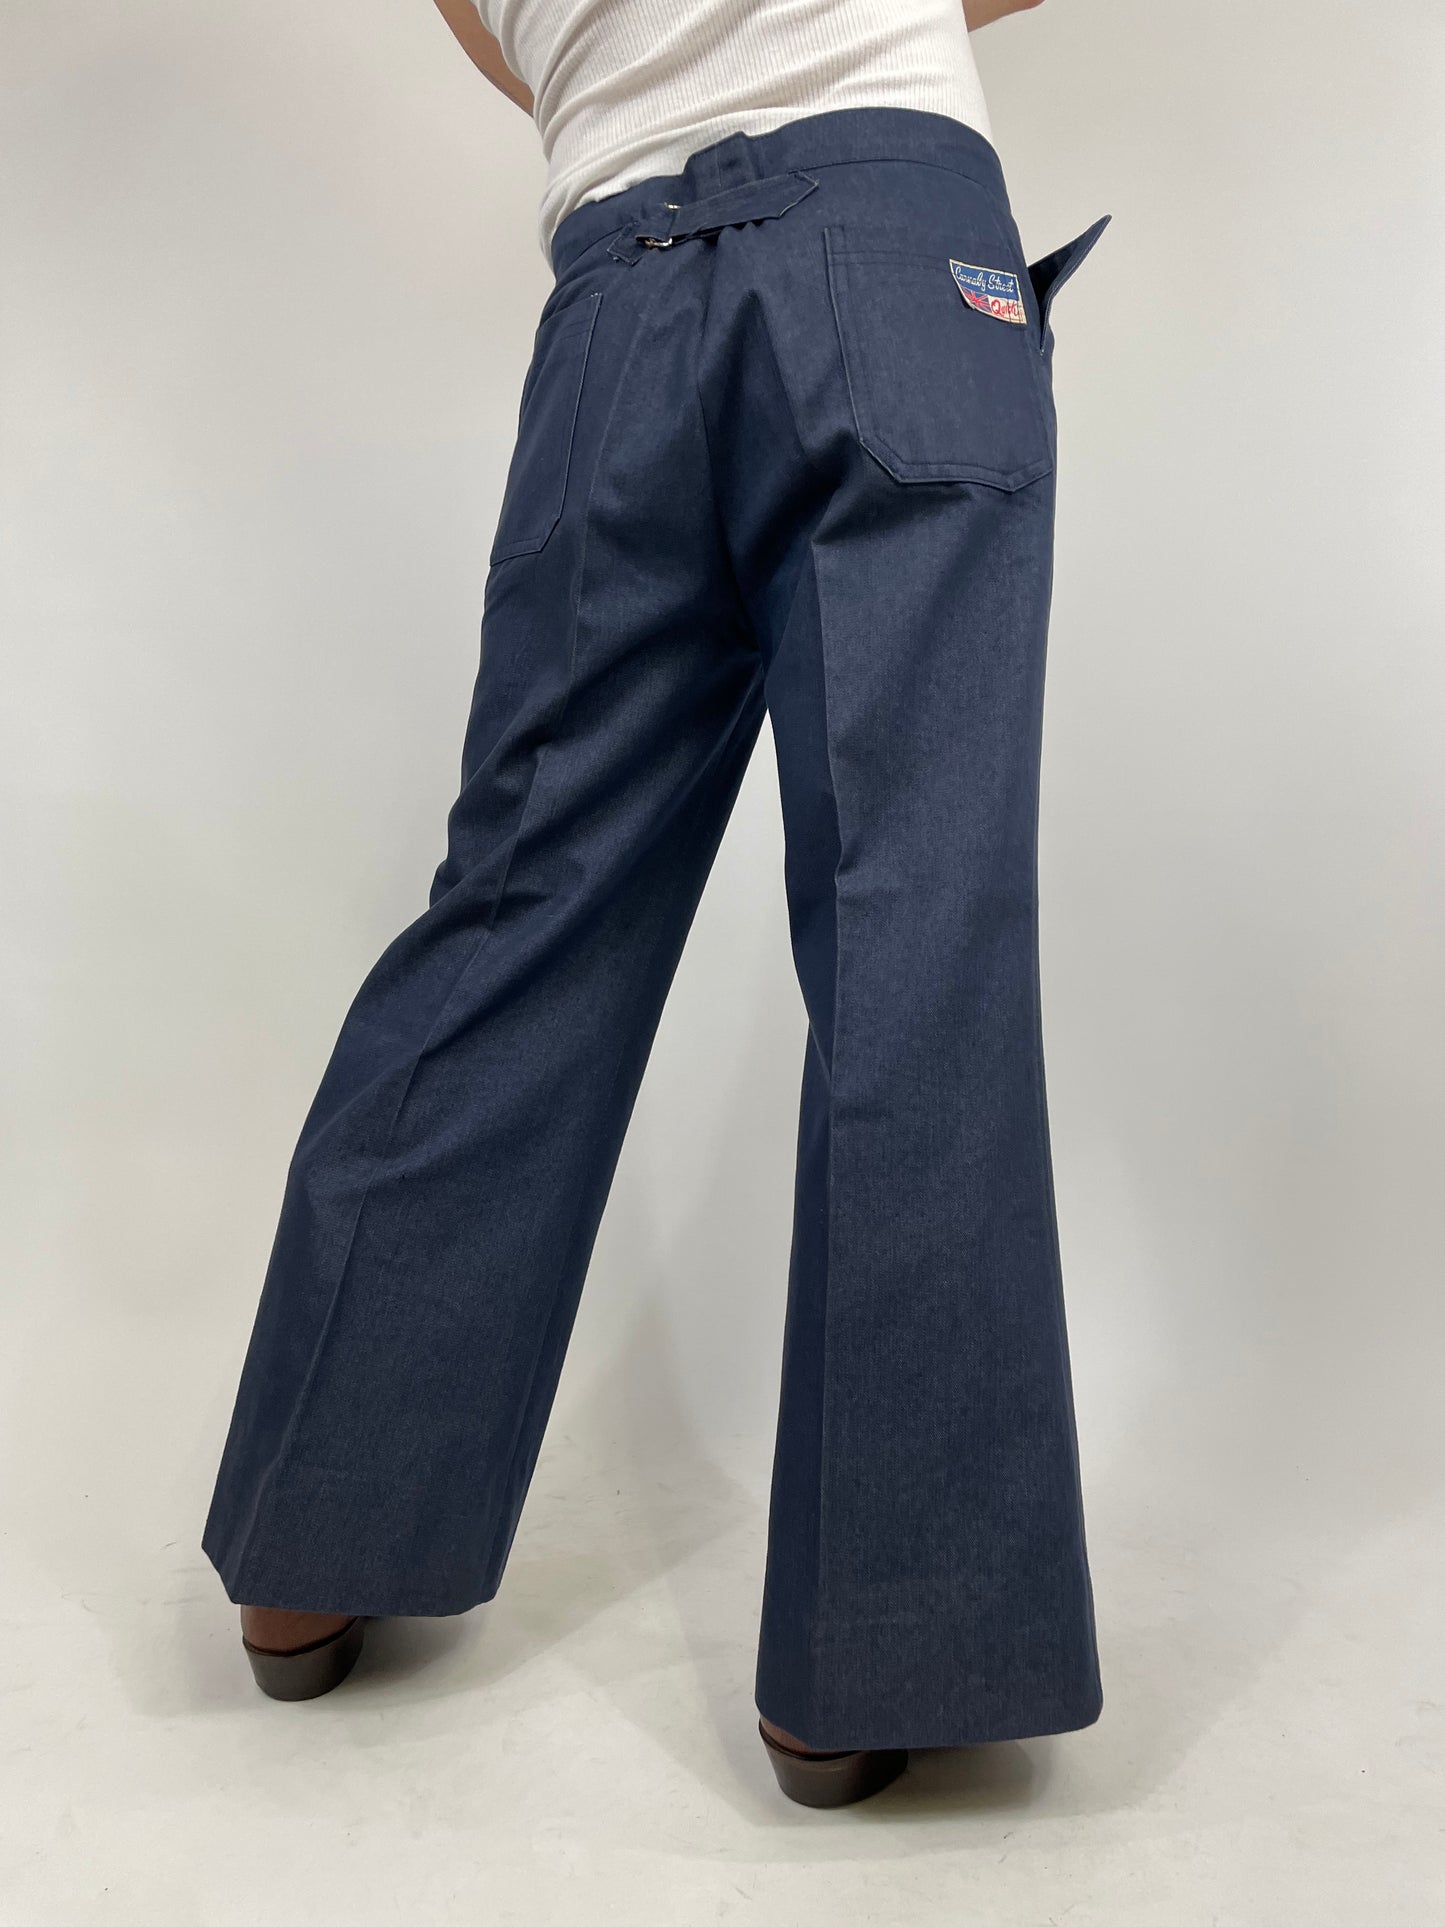 Carnaby Street Quick 1970s Pants